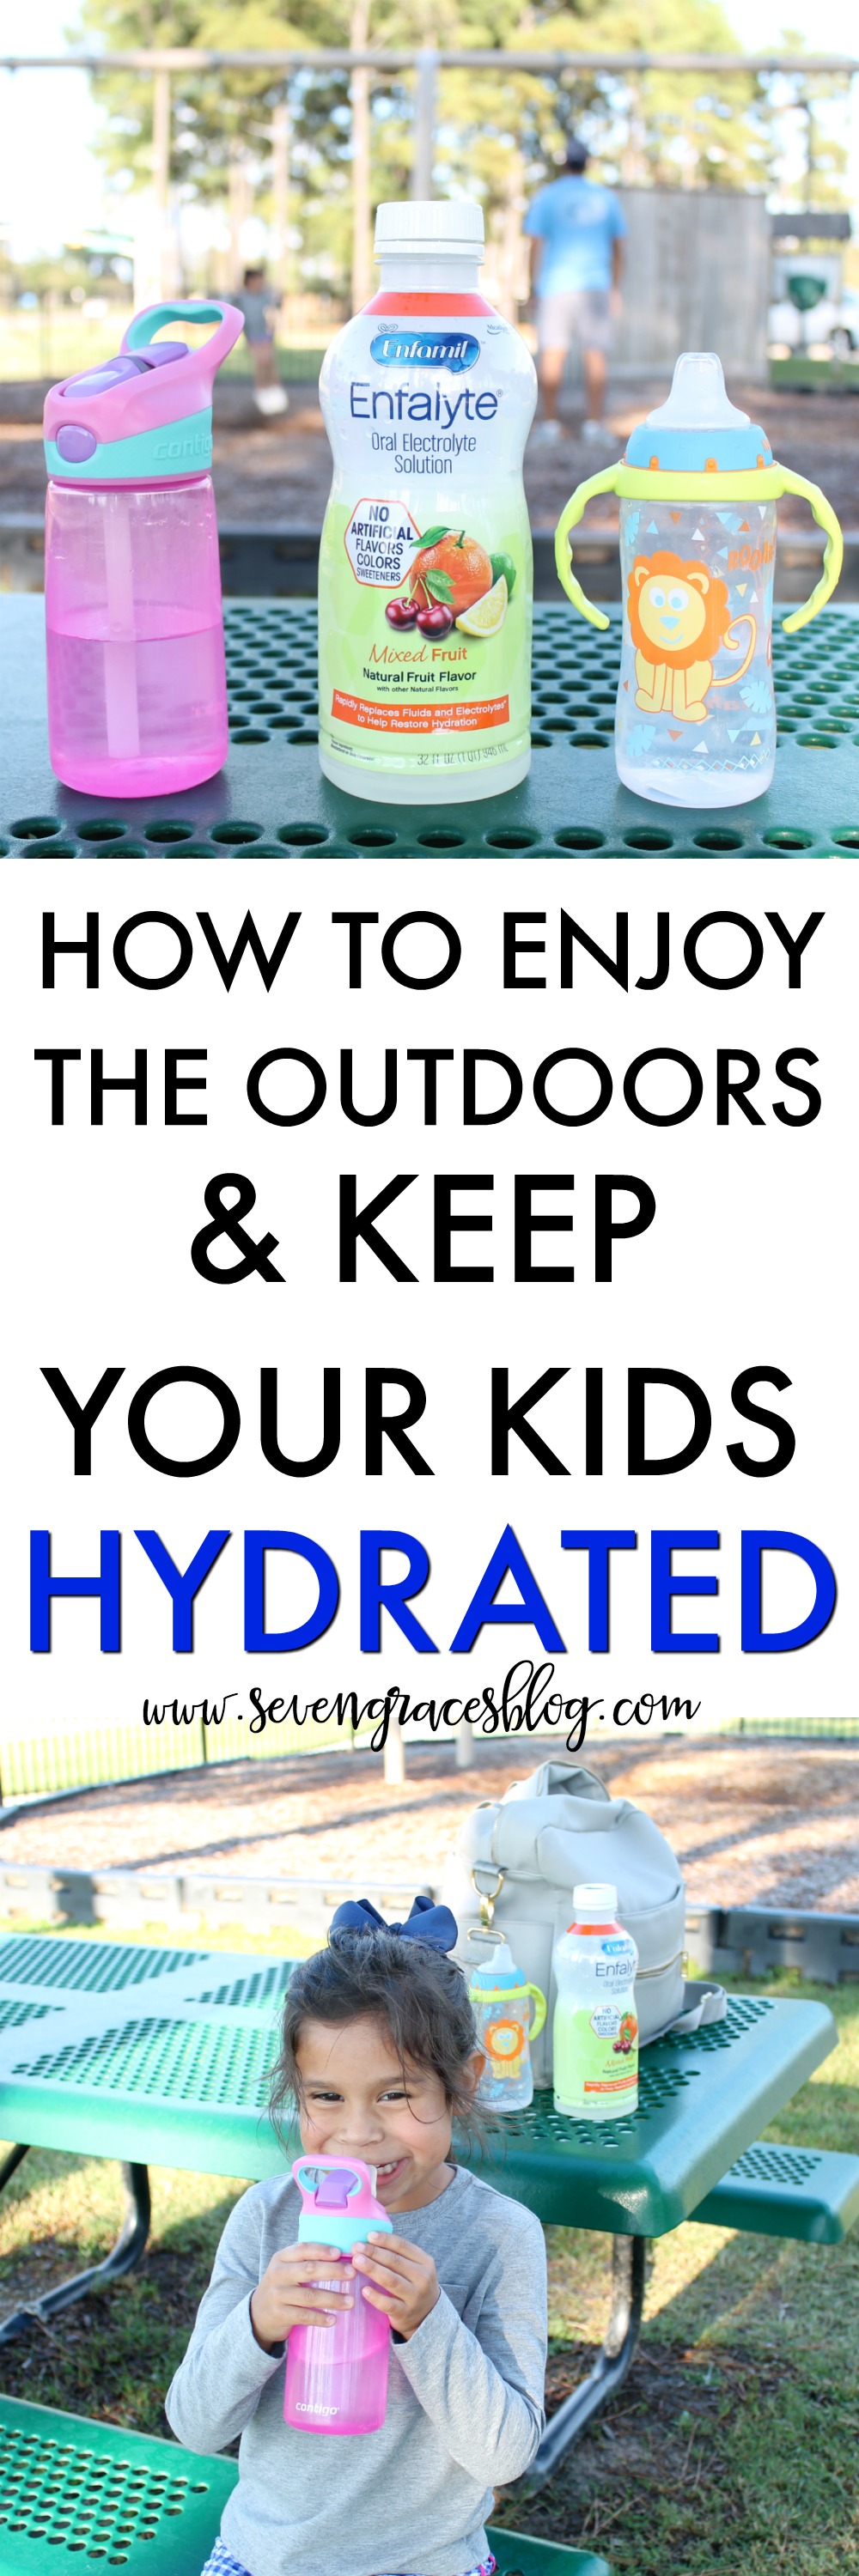 How to enjoy the outdoors and keep your kids hydrated: A great resource for moms! #enfalyte #ad